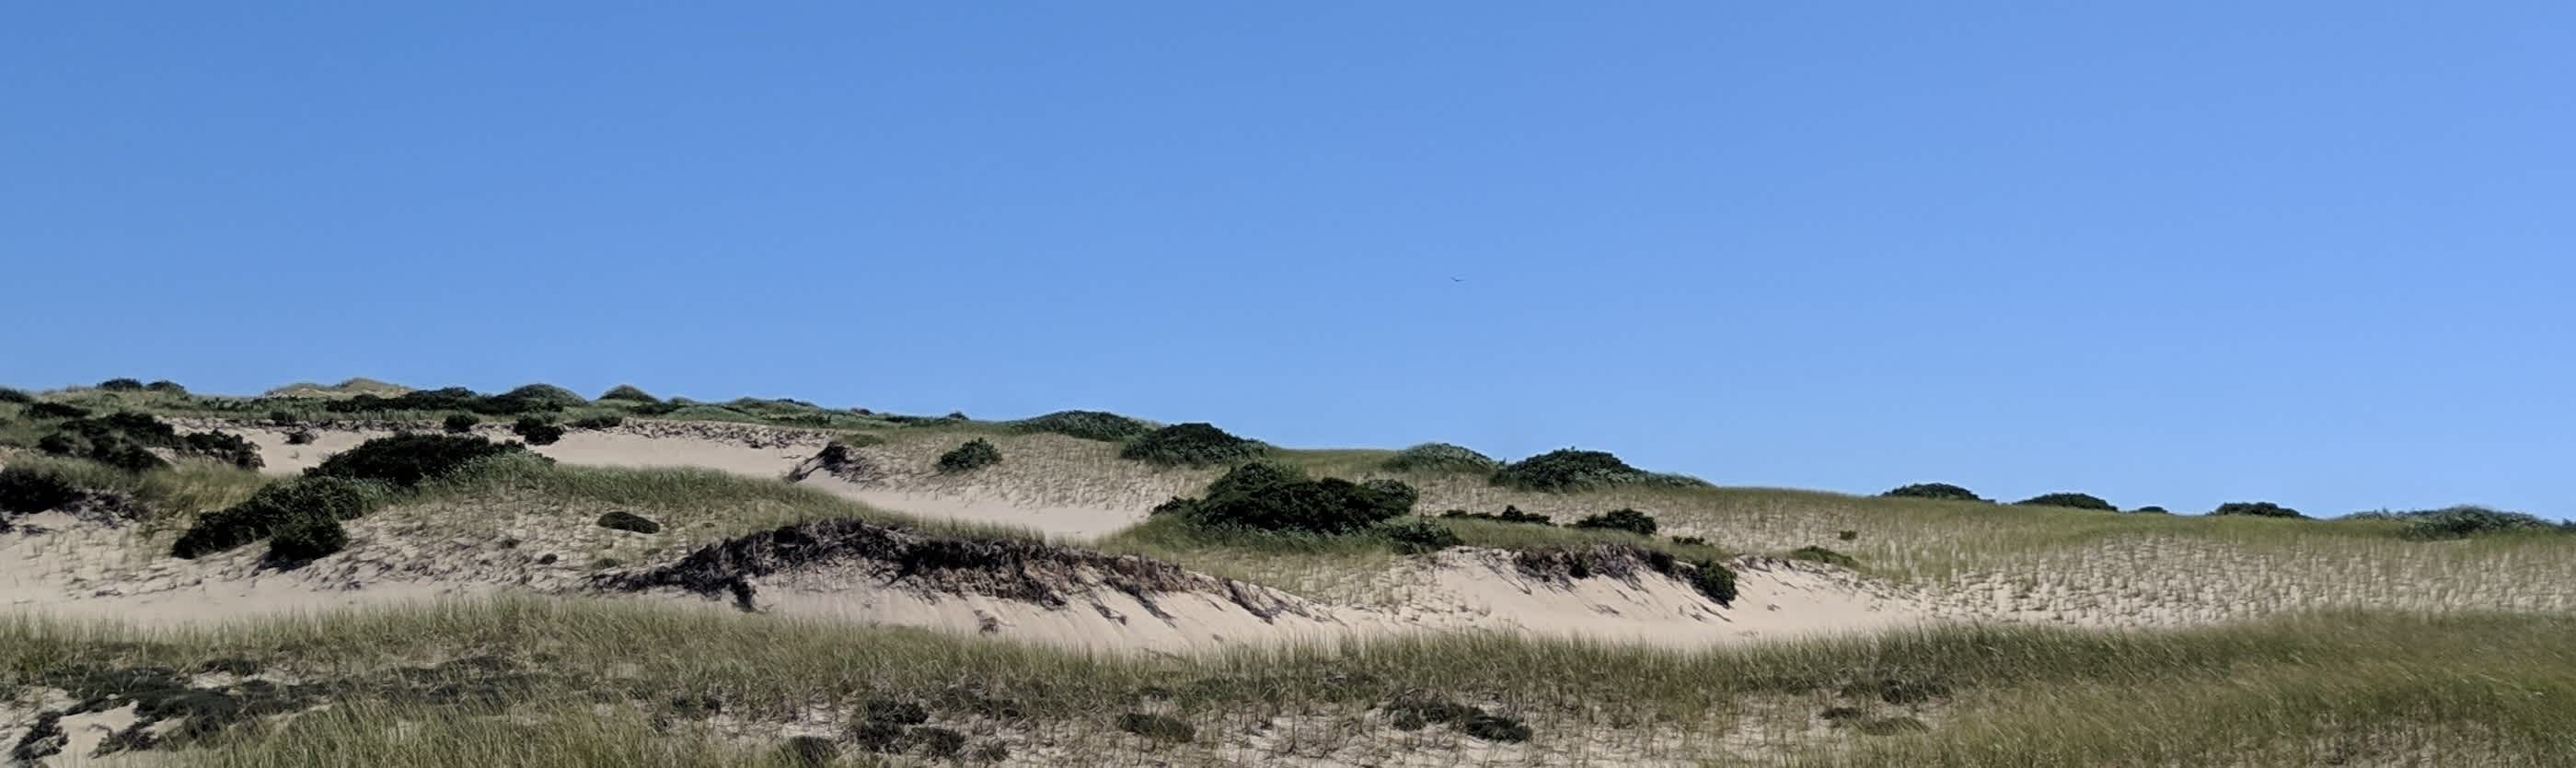 White dunes with beach grass against a cloudless blue sky